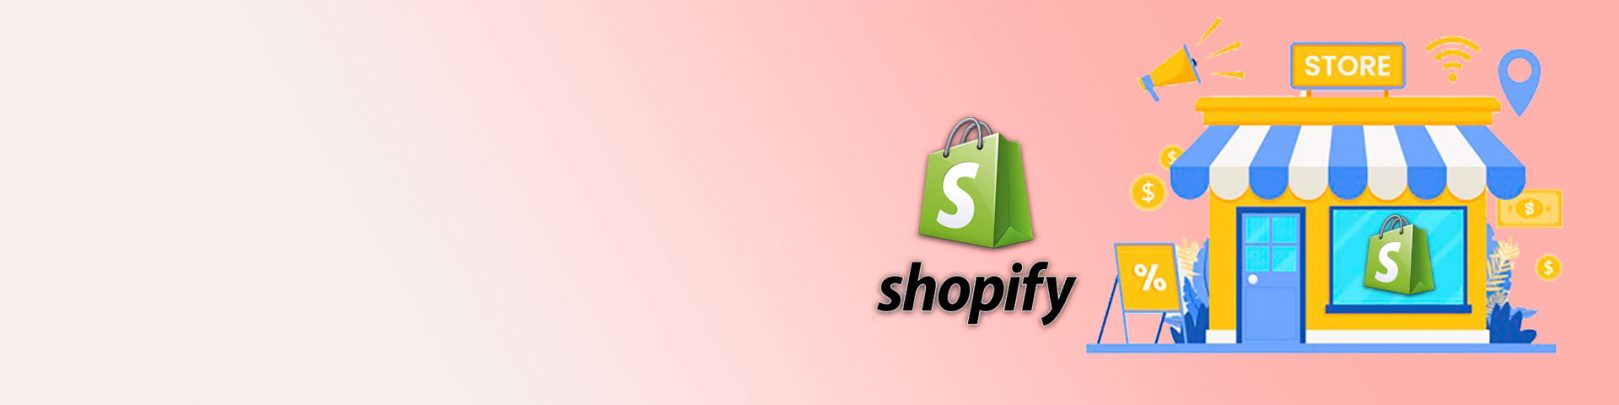 Things-to-make-and-sell-on-Shopify-store